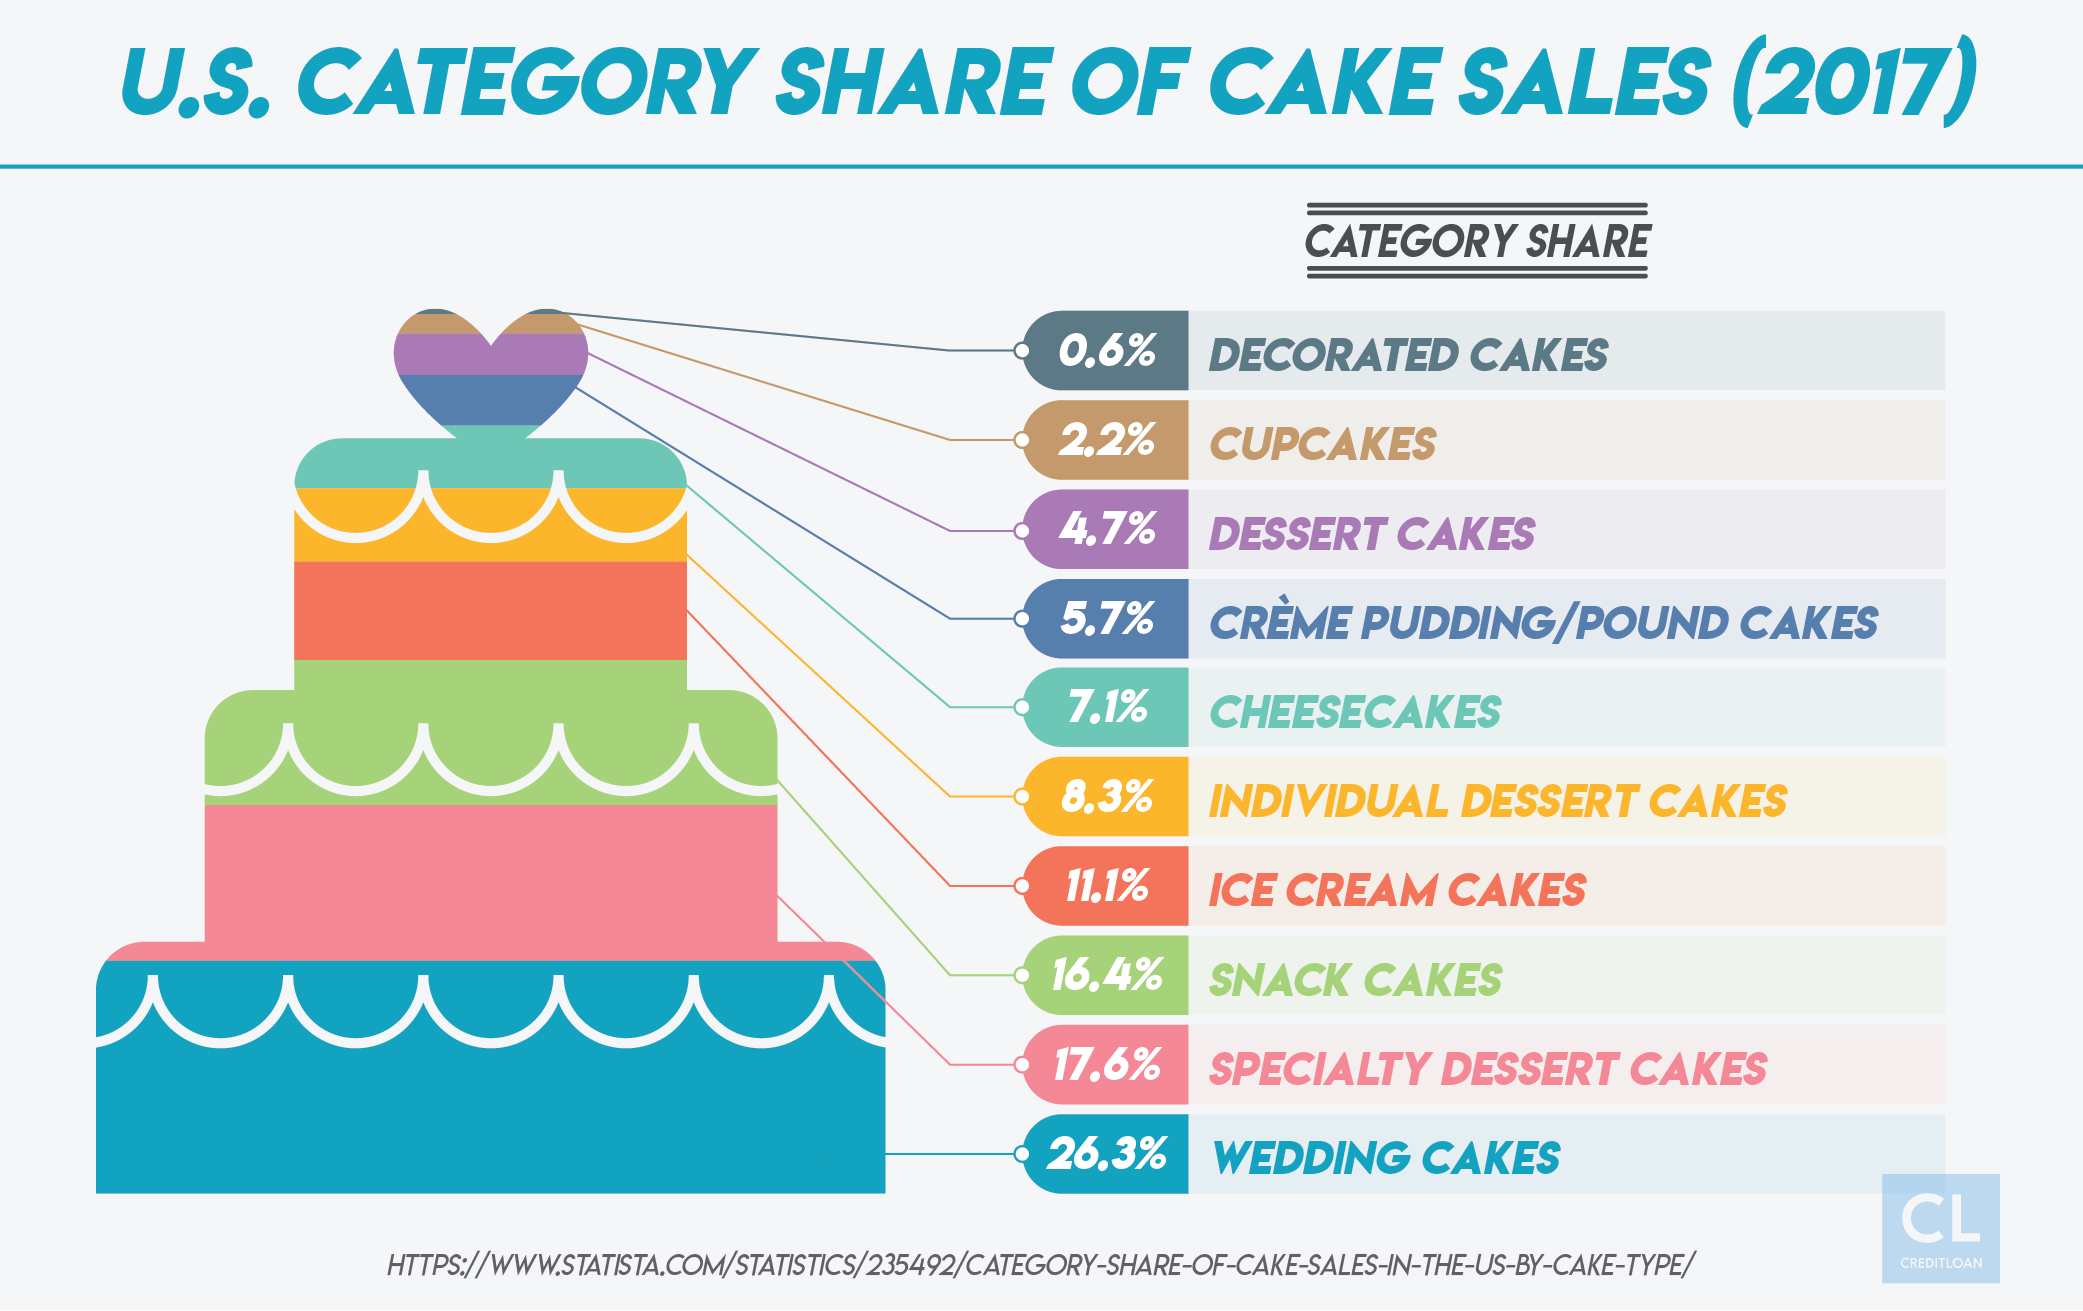 U.S. Category Share of Cake Sales in 2017